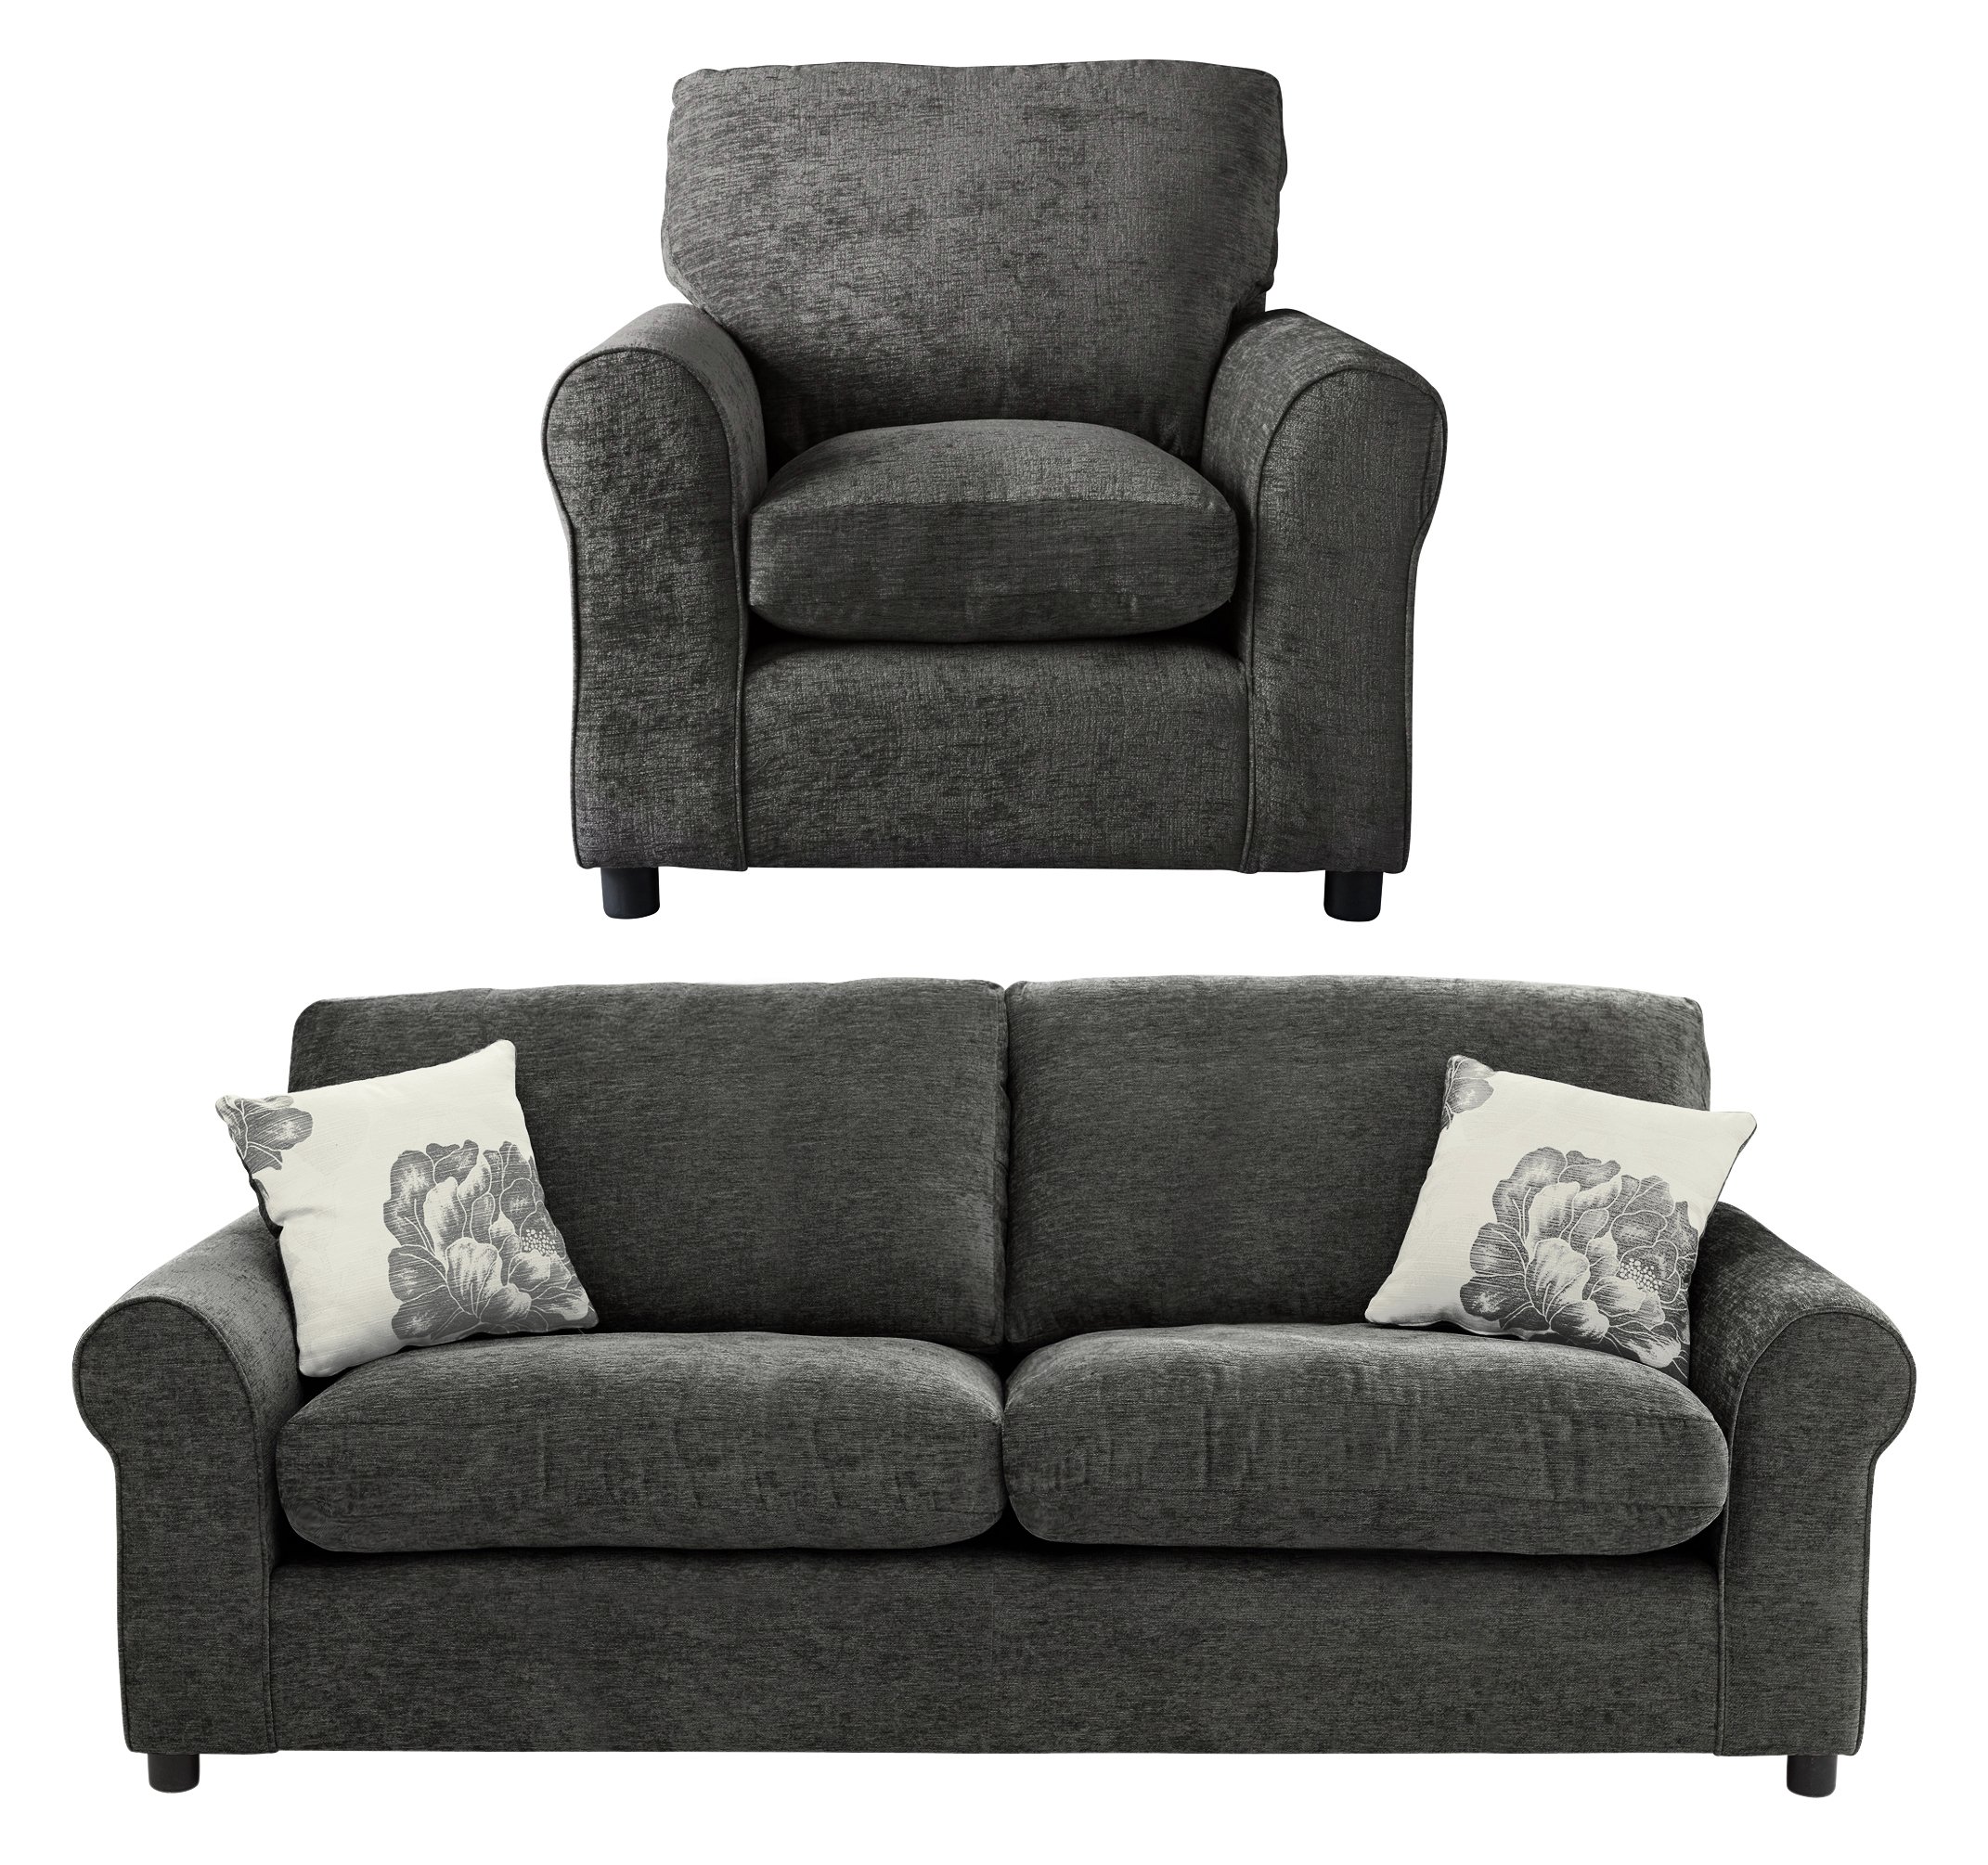 Argos Home Tessa Fabric 3 Seater Sofa and Chair - Charcoal